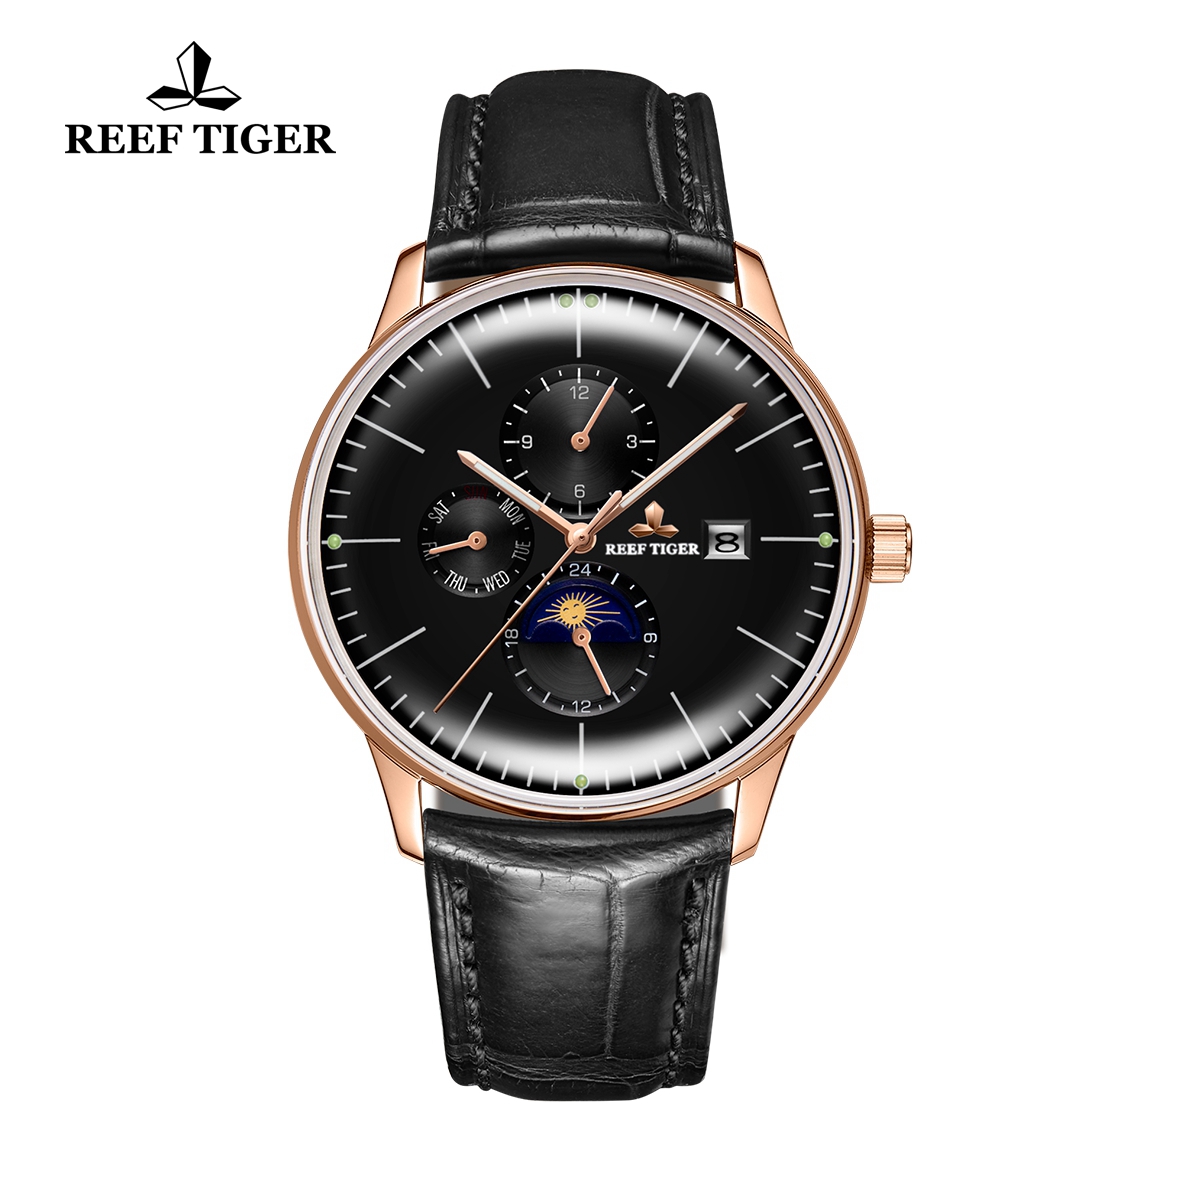 Reef Tiger Seattle Philosopher Convex Lens Genuine Leather Strap Automatic Watches with Date Day RGA1653-PBB